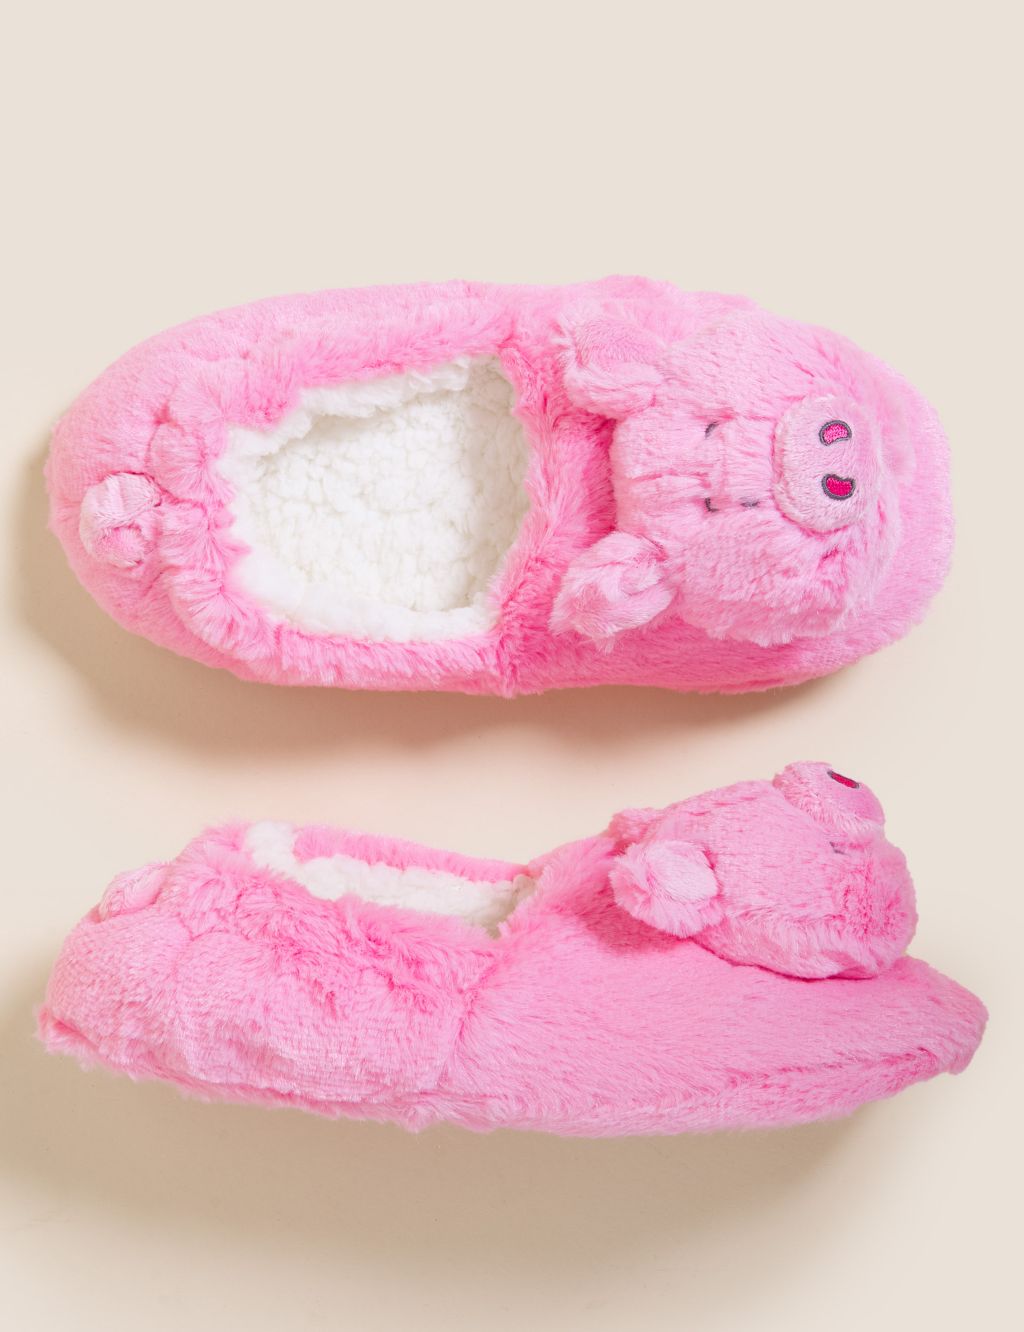 Kids' Percy Pig™ Slippers (5 Small - 6 Large) image 4